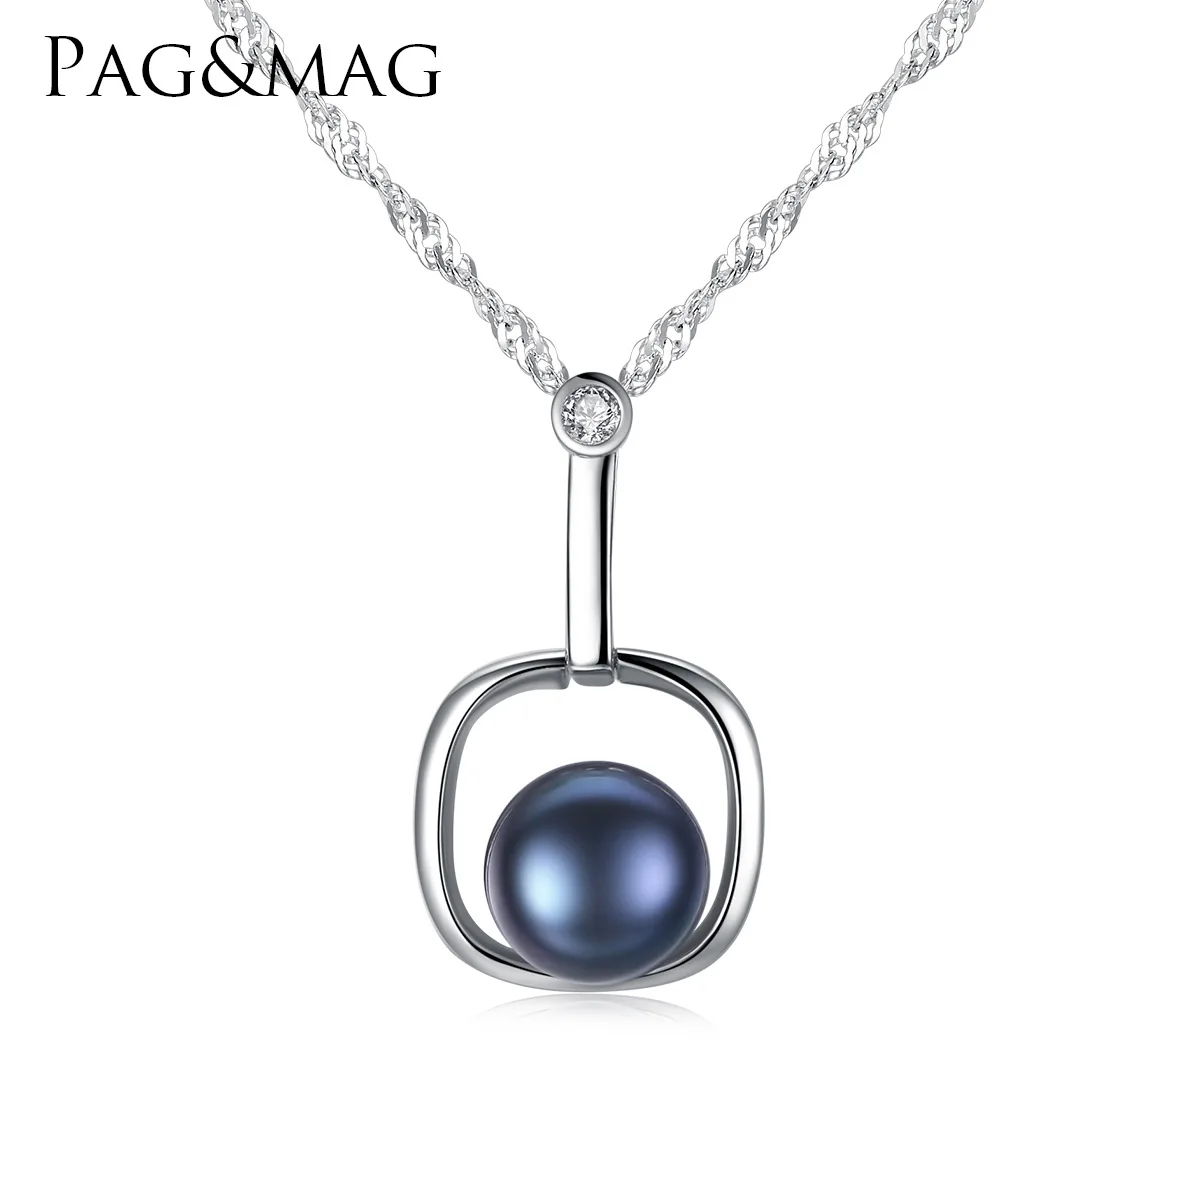 

PAG-MAG S925 pure silver pendant waterwave chain item ornament natural freshwater pearl anti-allergy pearl necklace woman